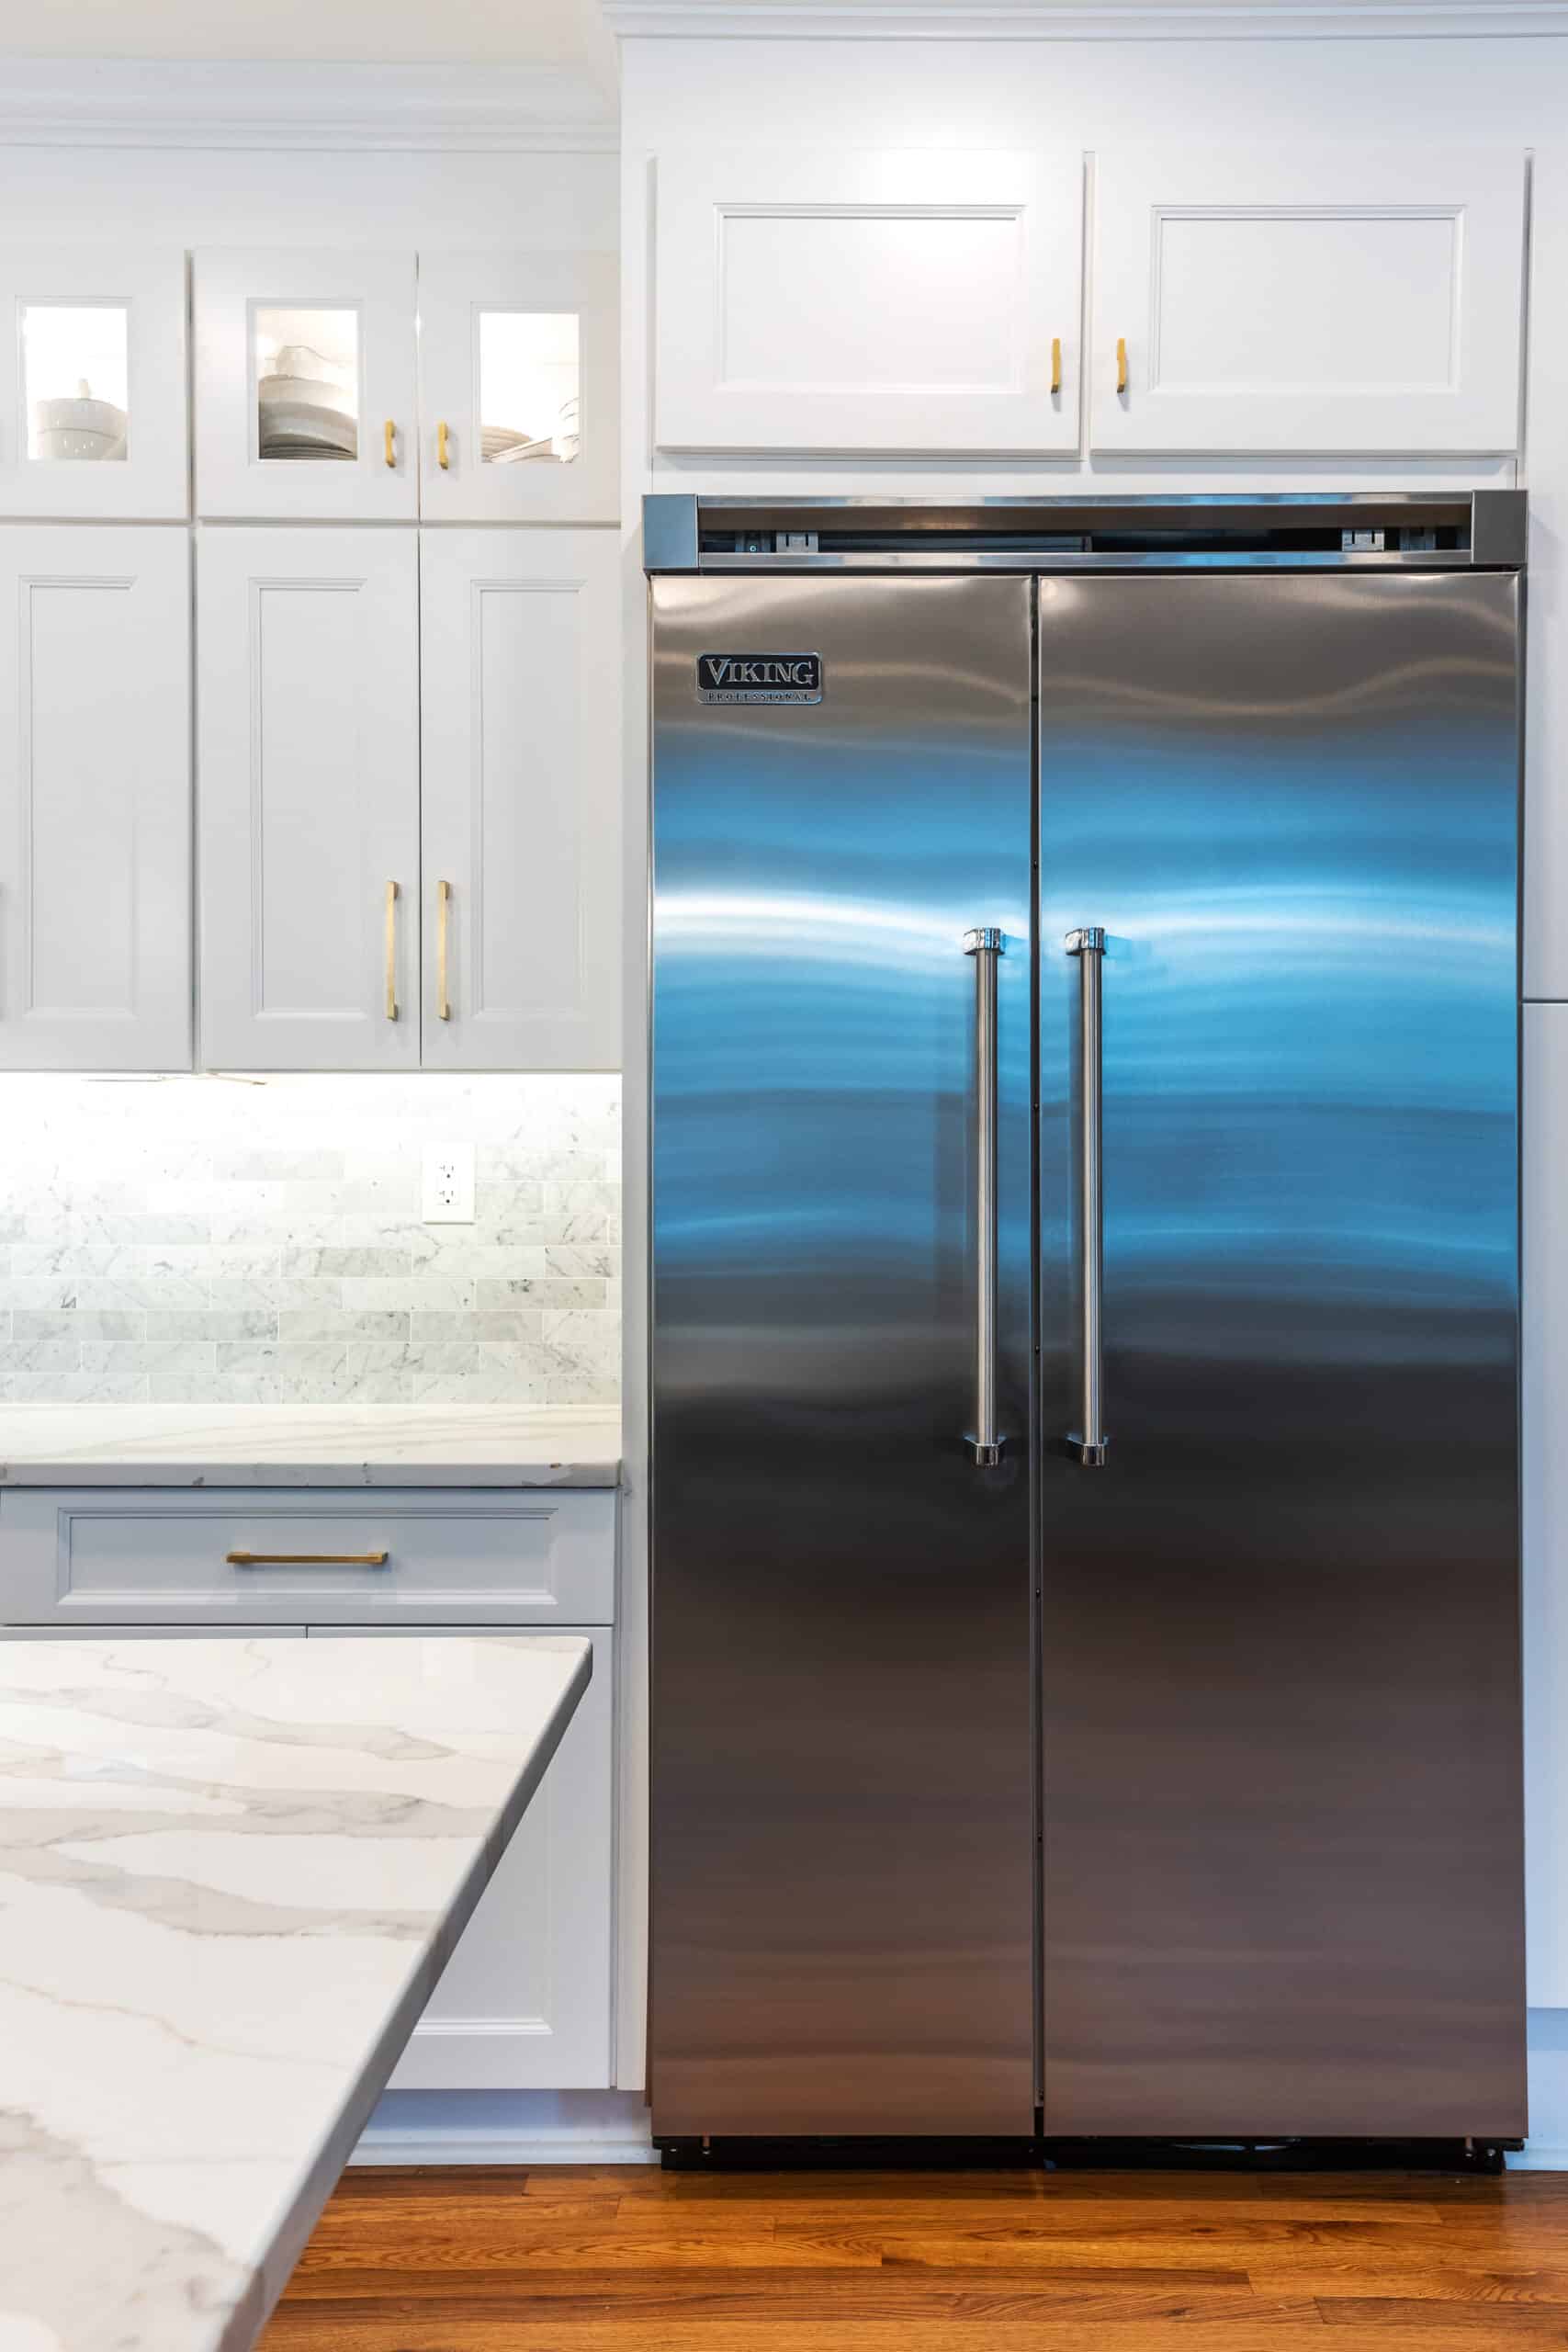 A stainless steel refrigerator in a white kitchen